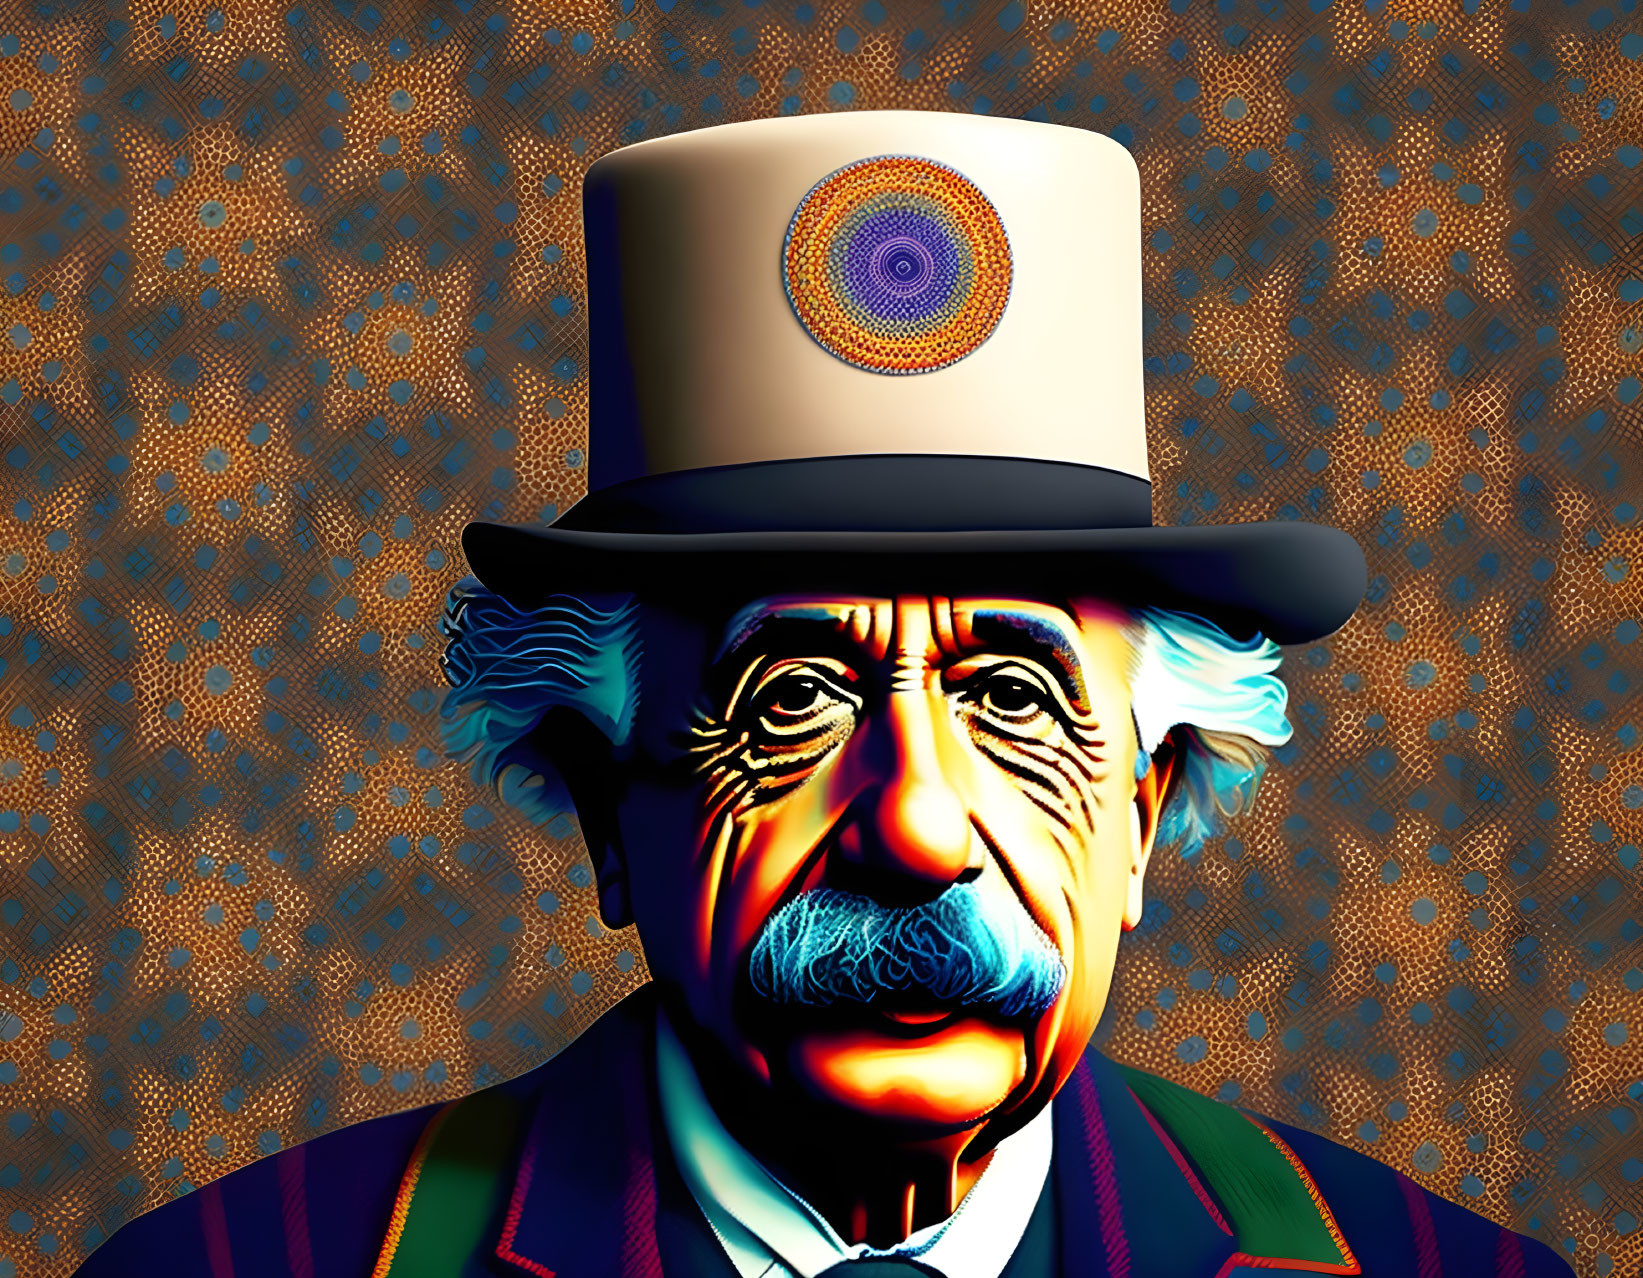 Colorful Stylized Portrait of Figure in Top Hat with Circular Design